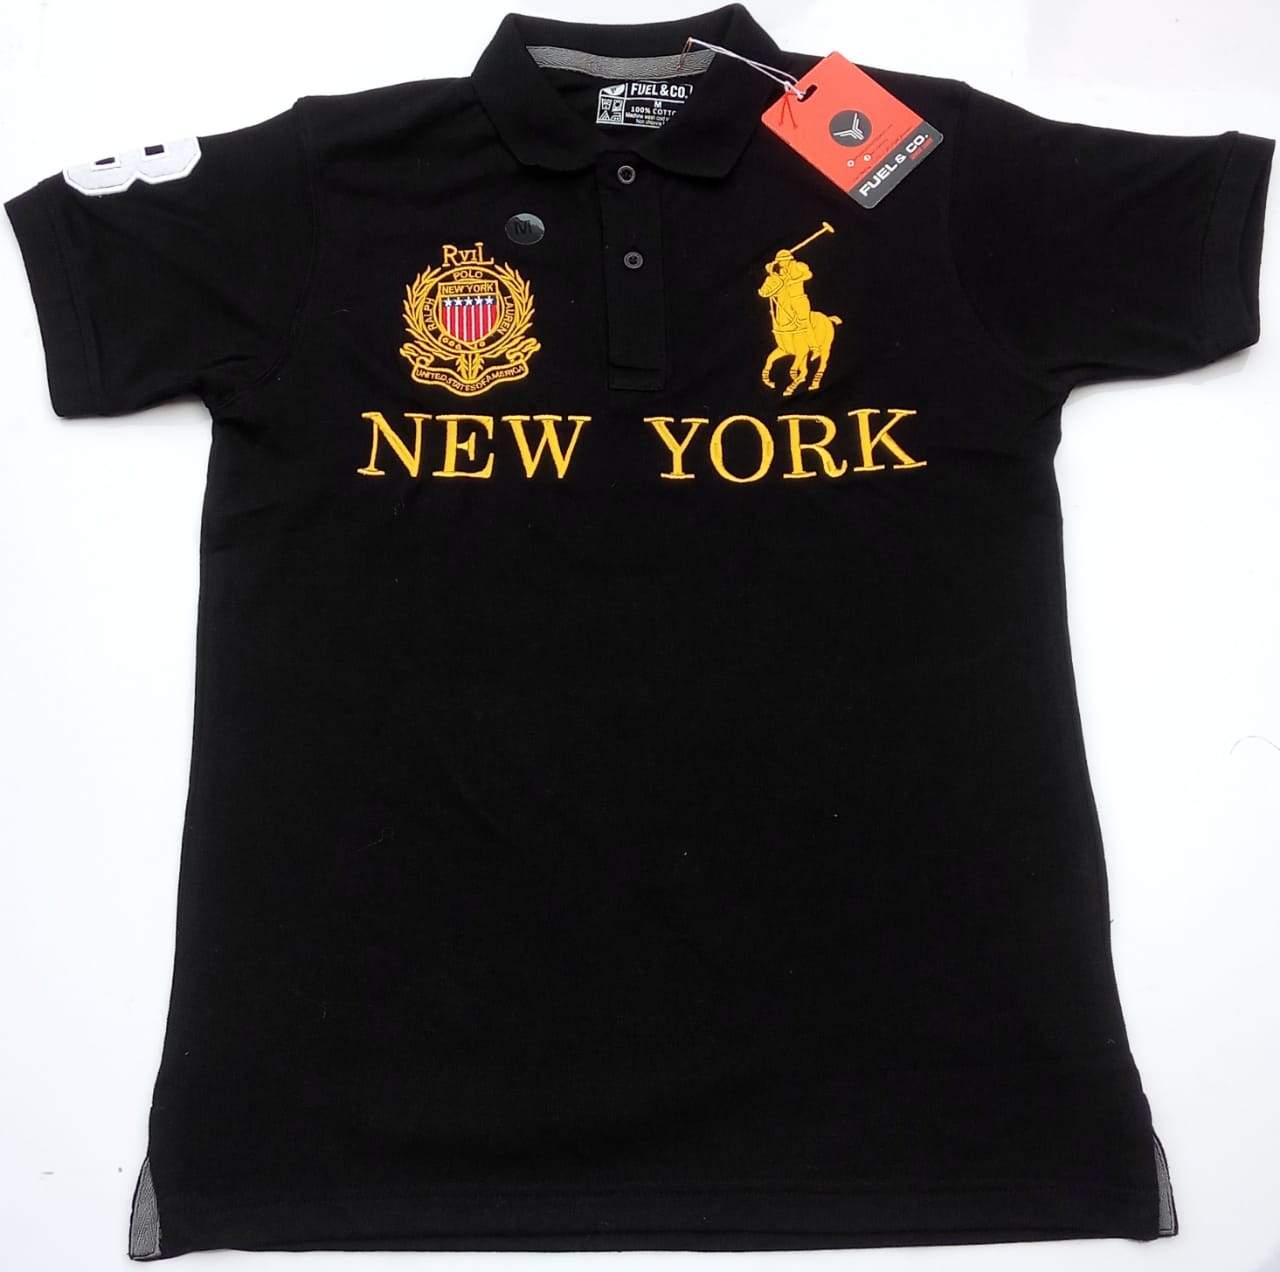 ralph lauren with new york logo - Random Store! Apparel and Clothing